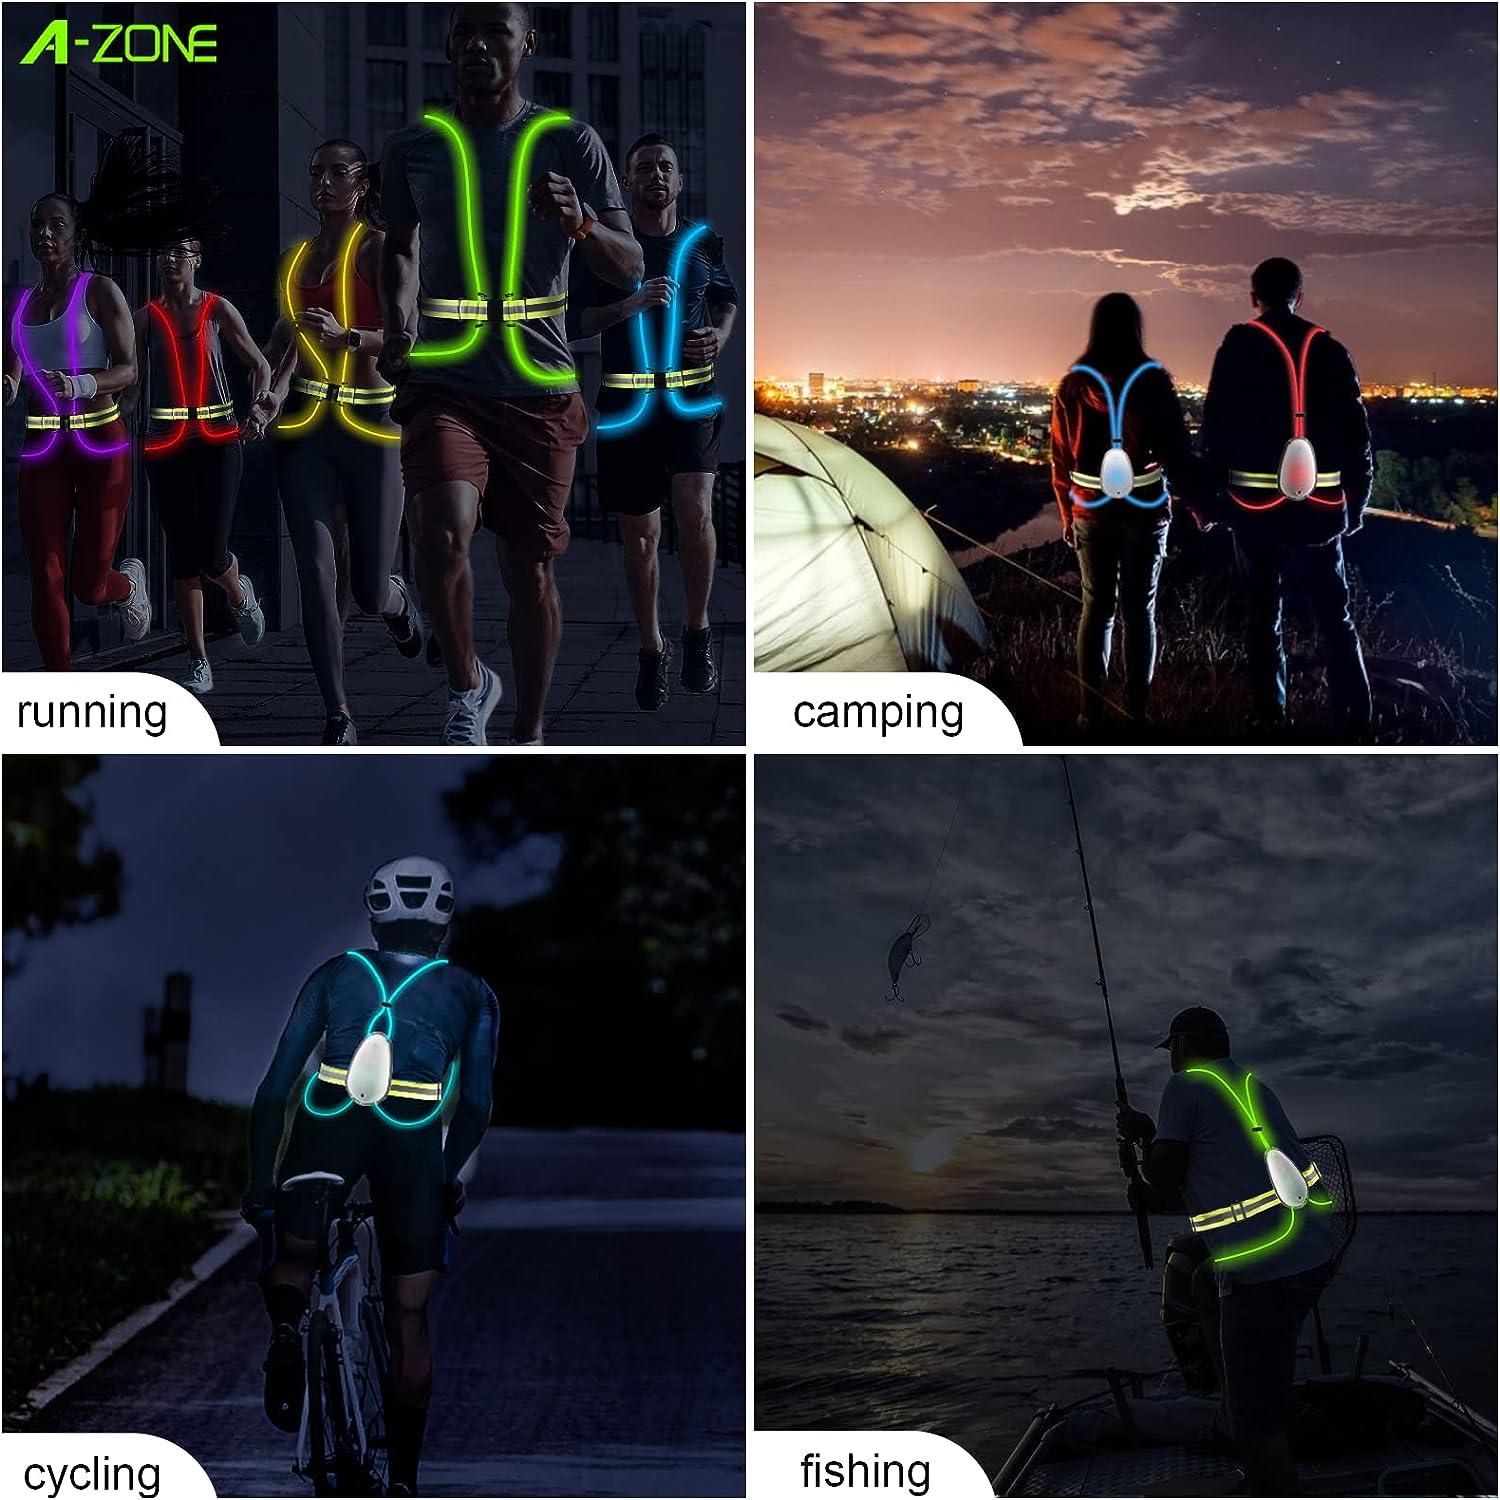 A-ZONE Running Lights for Runners High Visibility Led Reflective Vest USB  Rechargeable Reflective Gear for Running/Cycling at Nights Lightweight  Waterproof